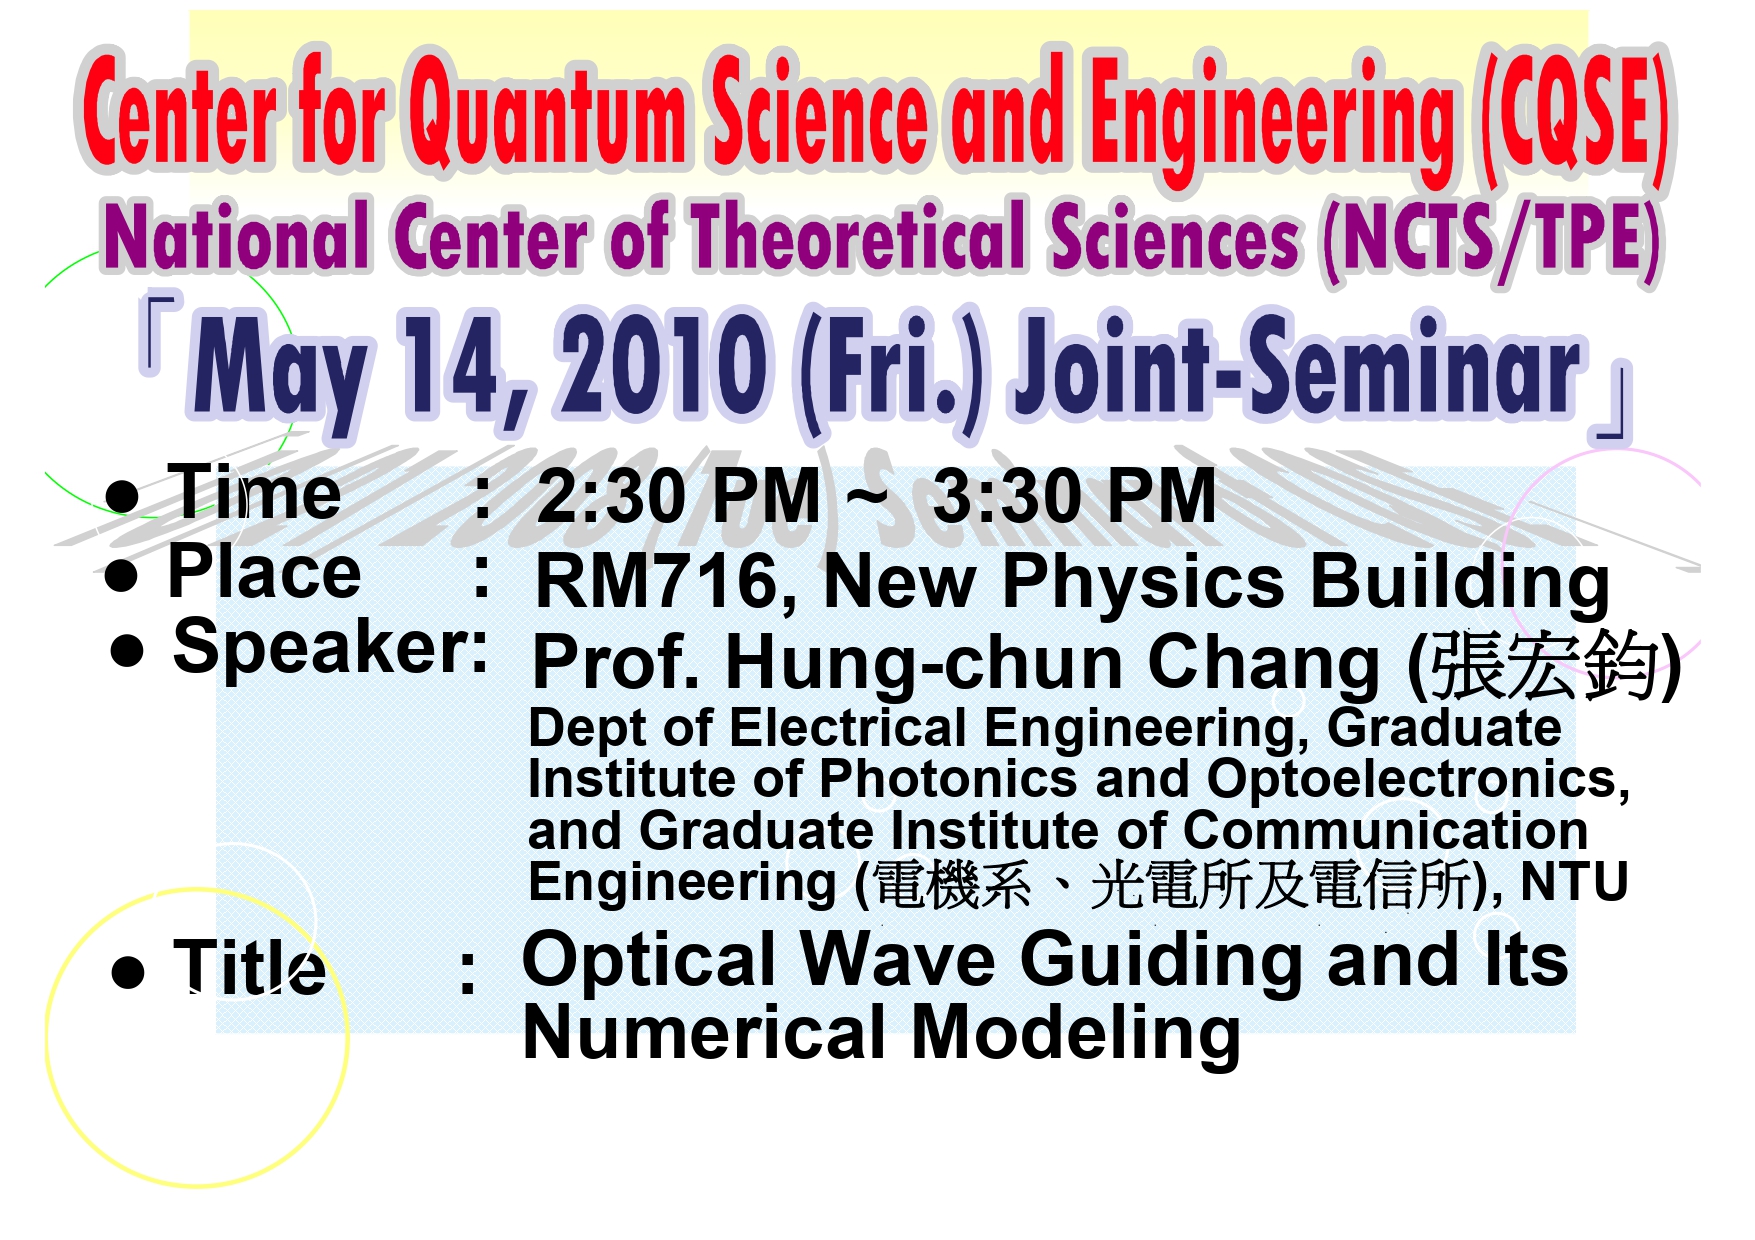 Joint Seminar of Center for Quantum Science and Engineering (CQSE) and National Center for Theoretical Sciences